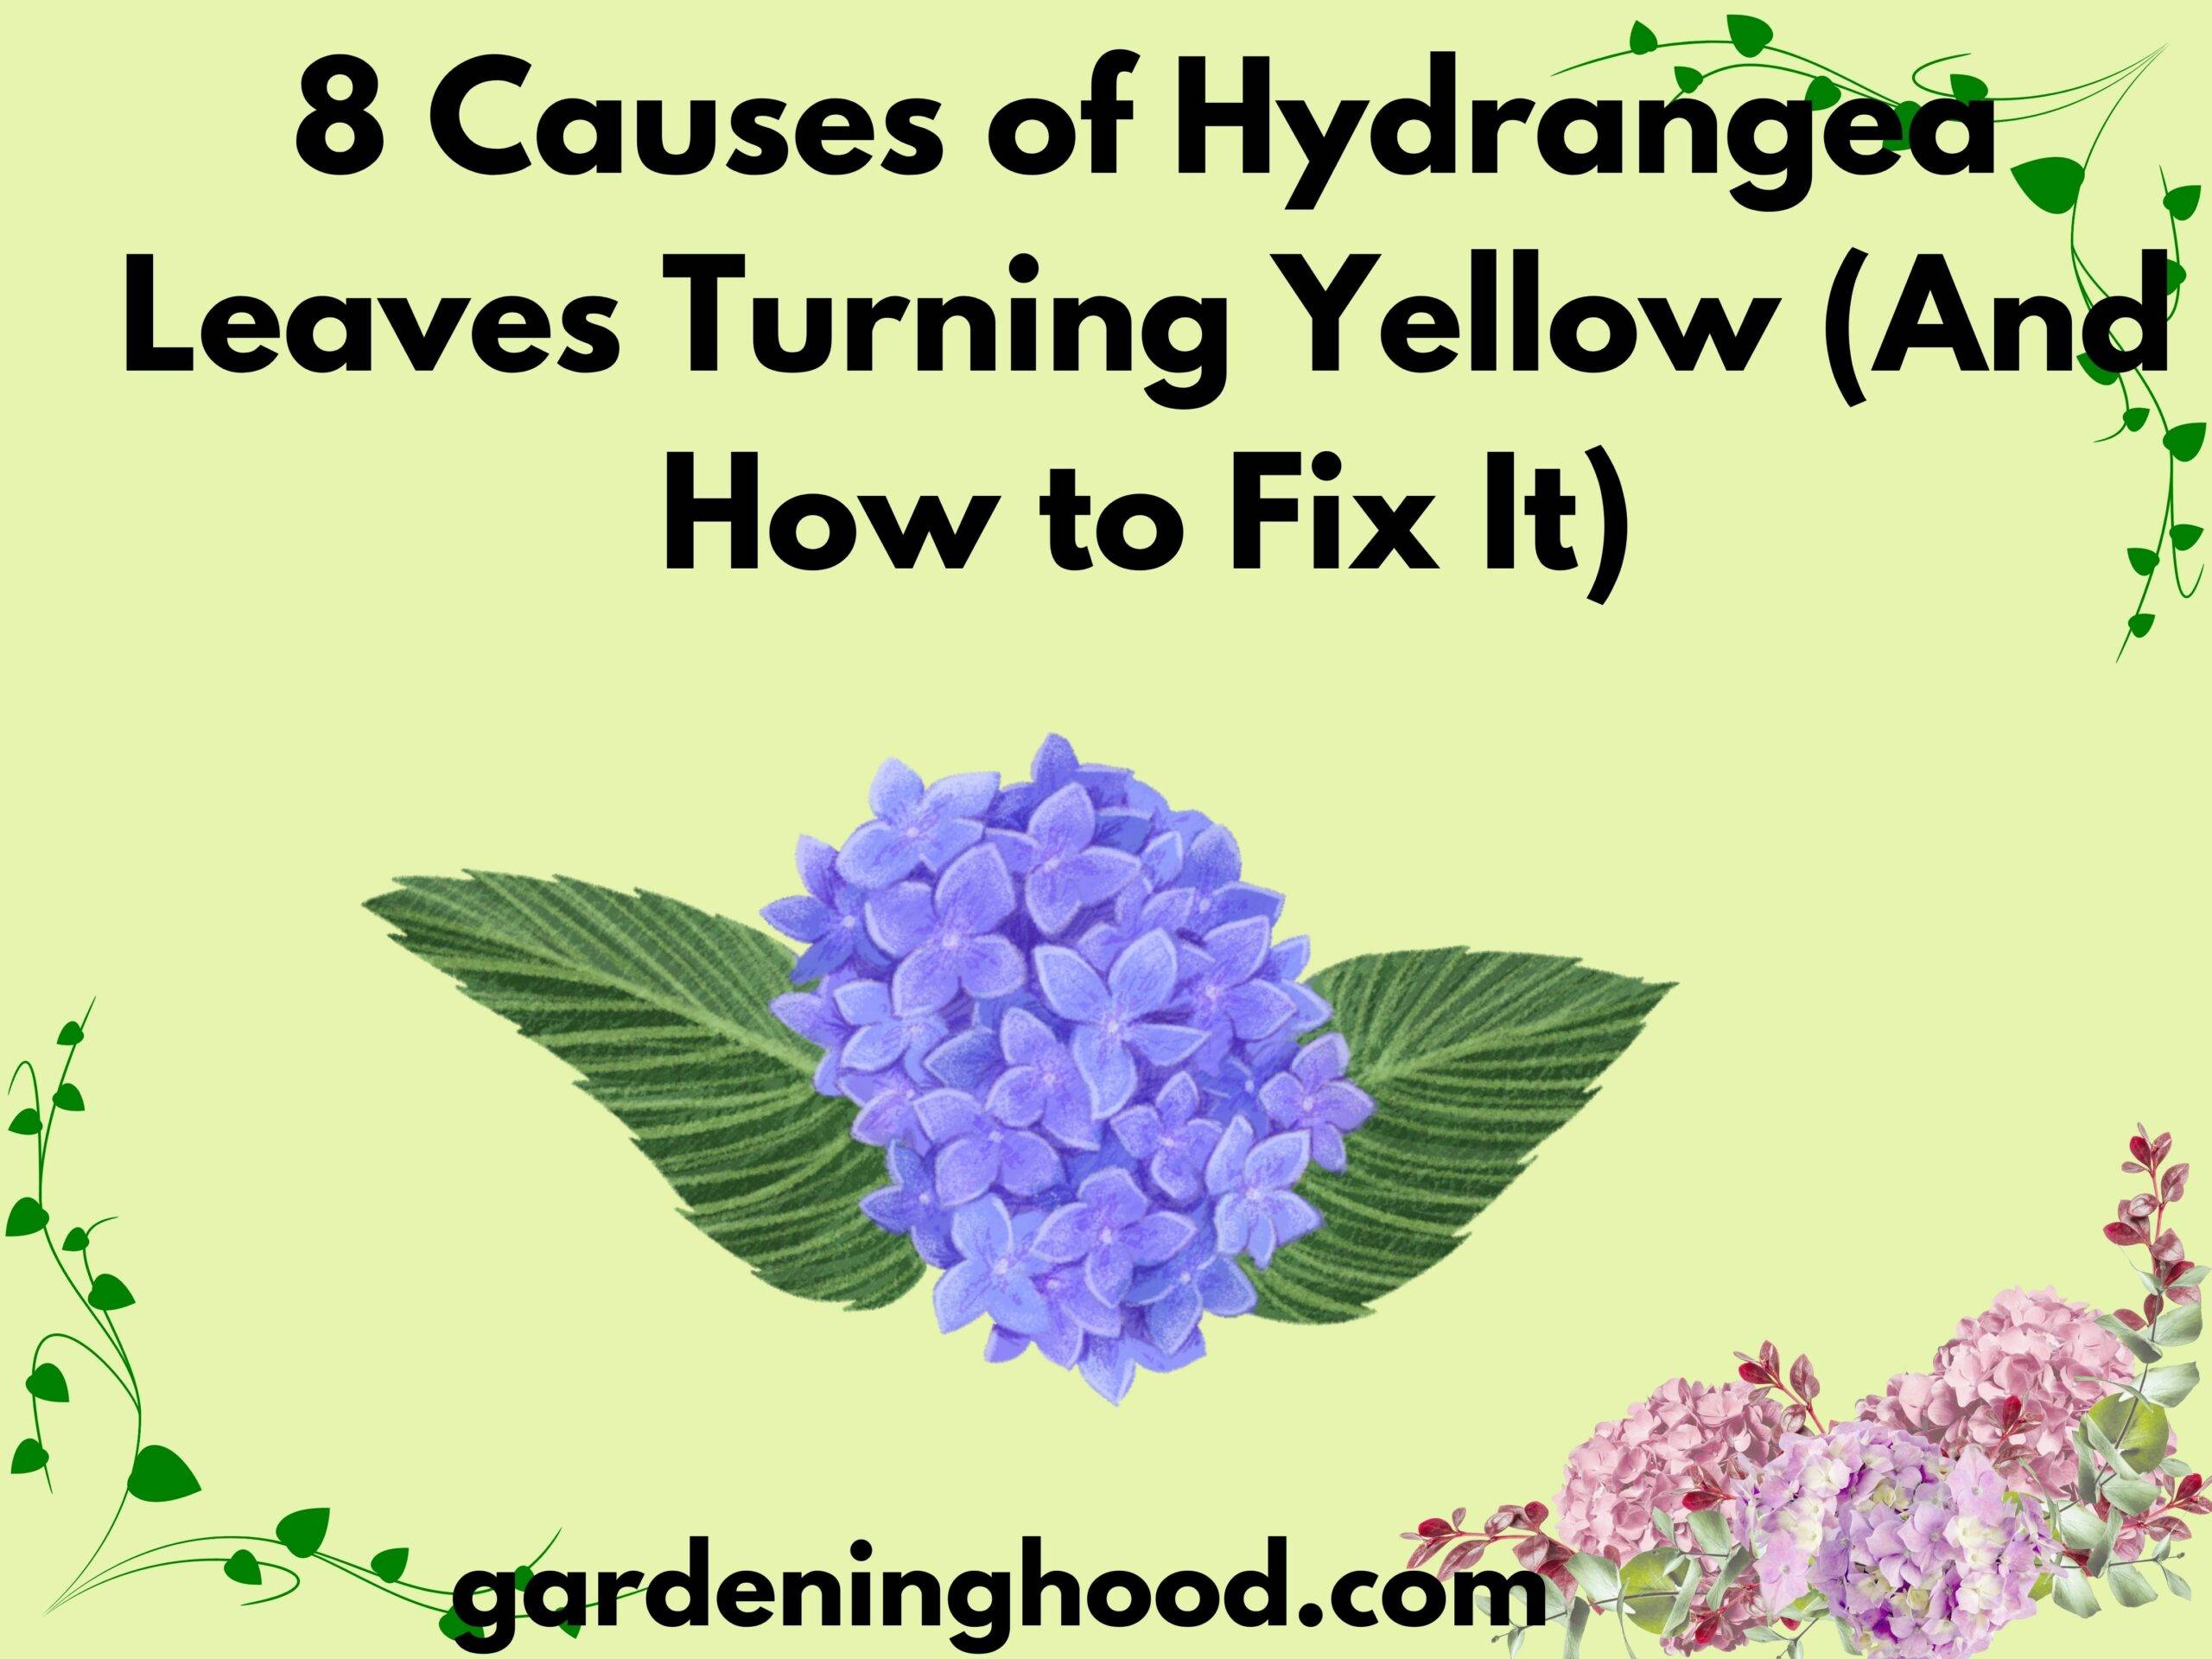 8 Causes of Hydrangea Leaves Turning Yellow (And How to Fix It)